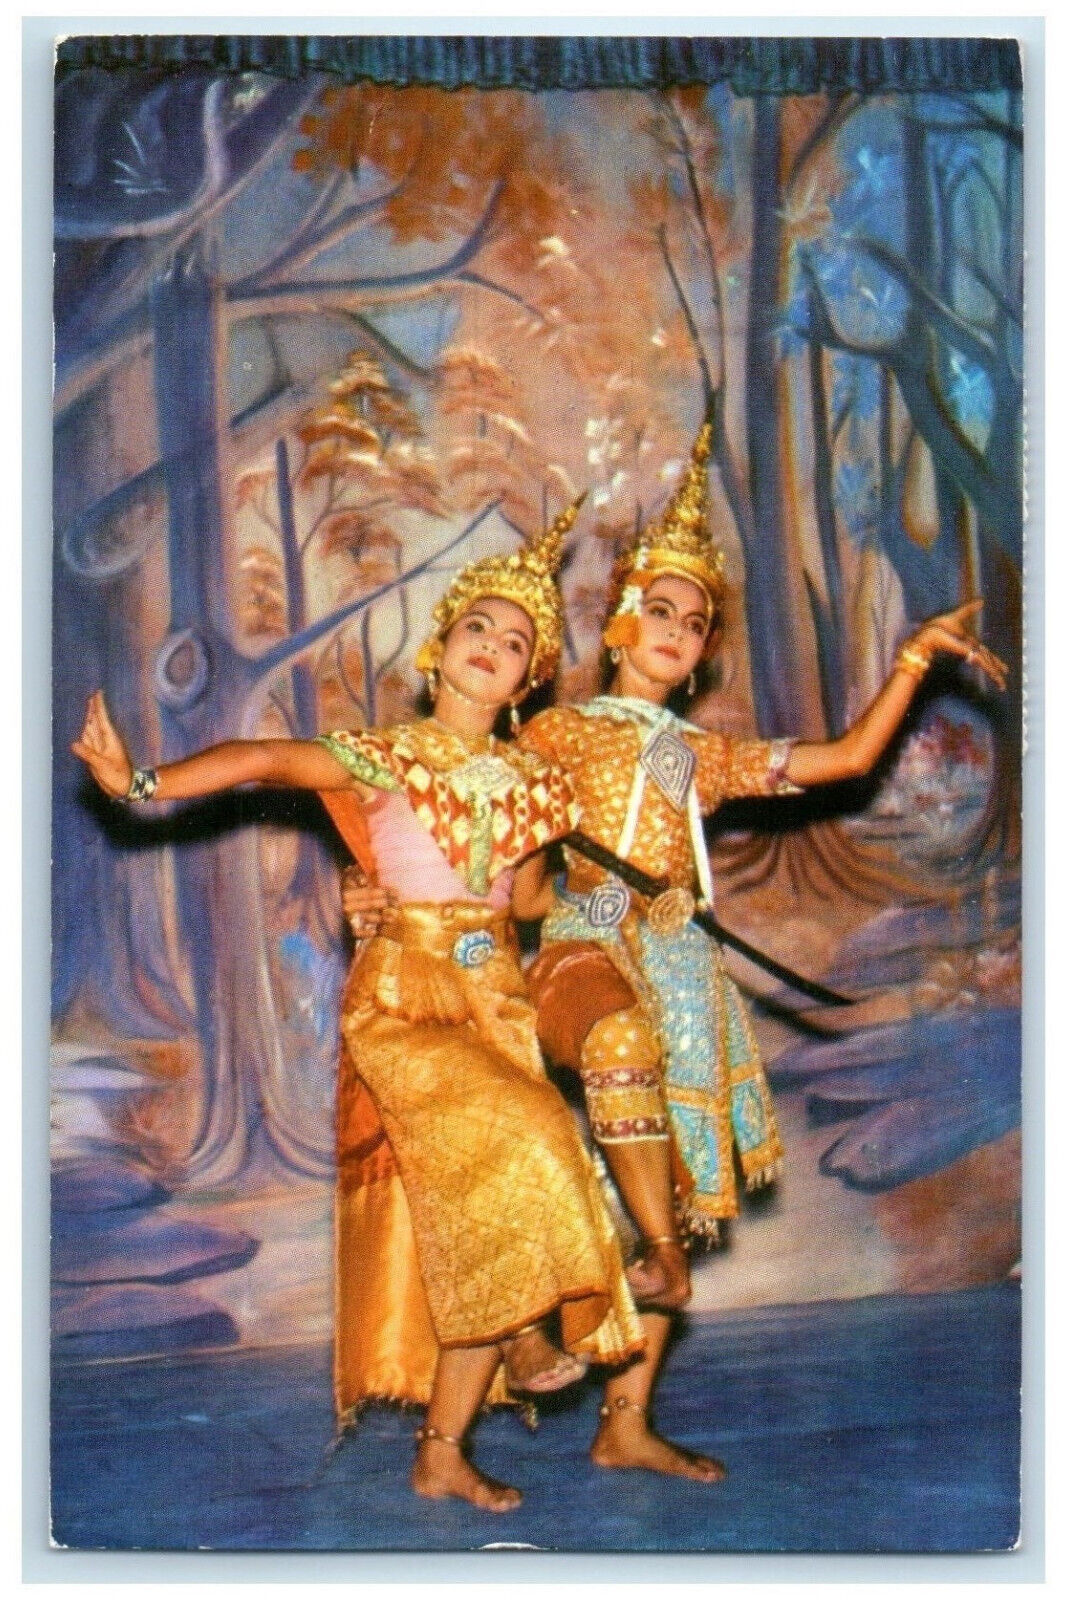 1965 Thia Classical Dance and Dress Bankok Thailand Vintage Posted Postcard